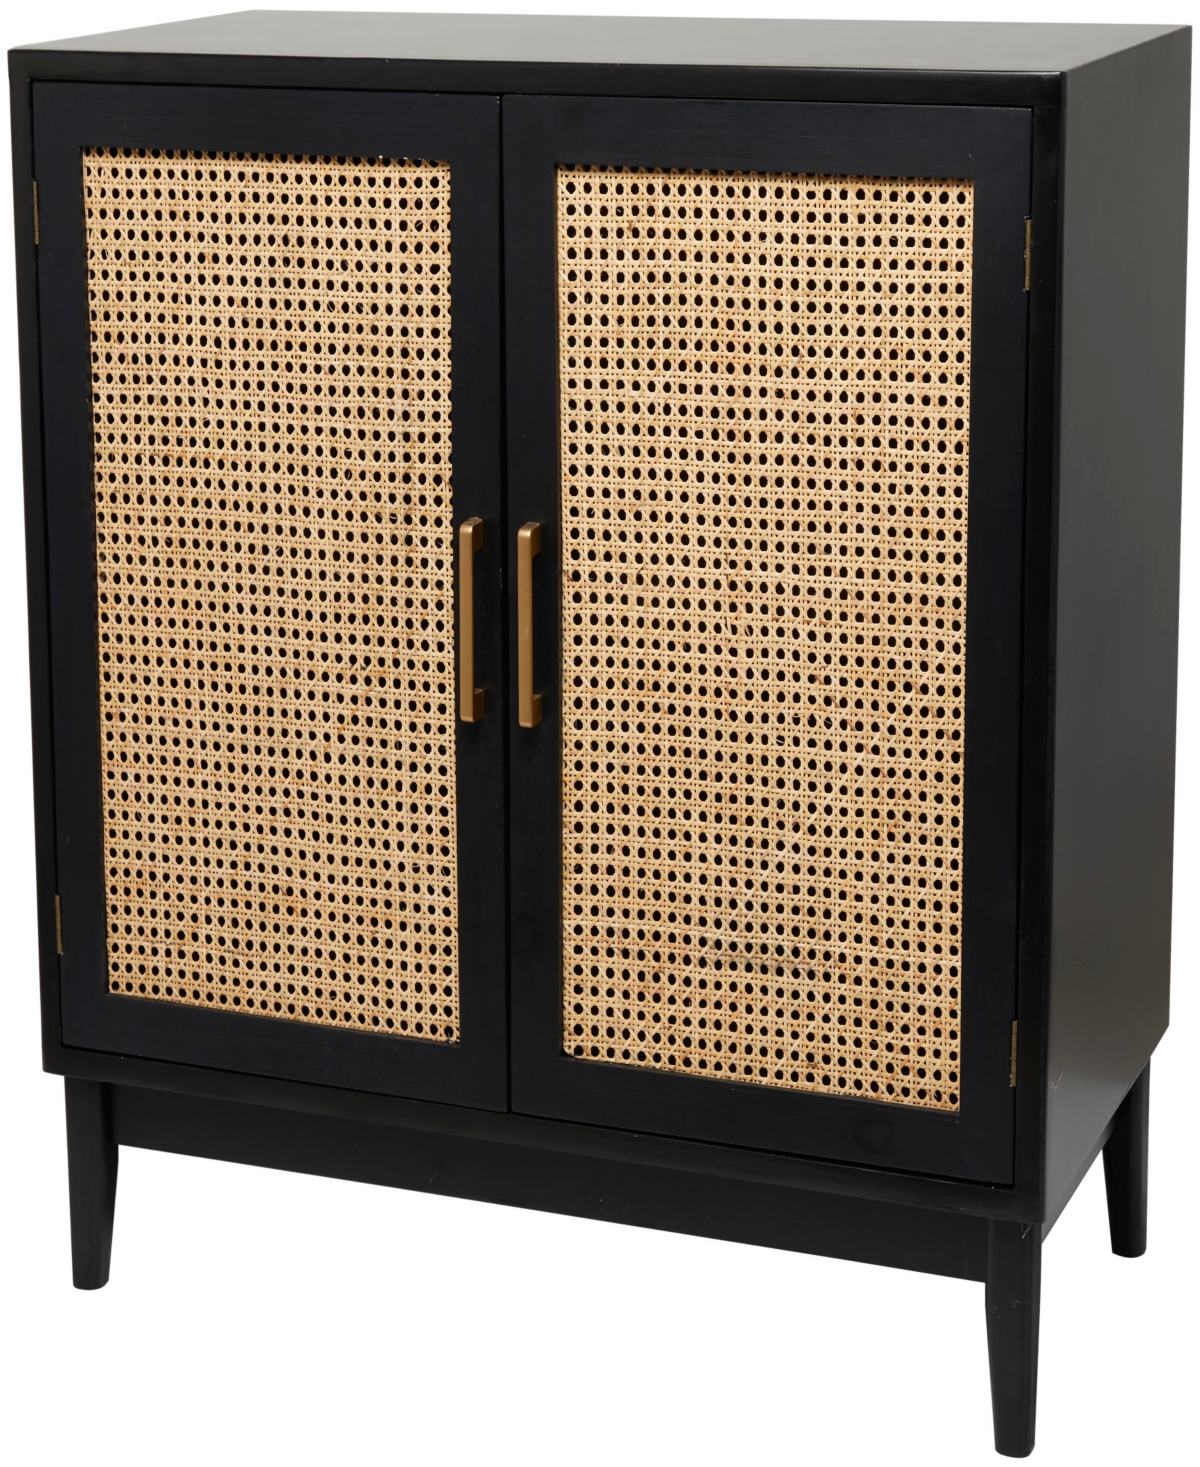 Rosemary Lane 36" Wood 1 Shelf And 2 Door Cabinet With Cane Front Doors And Gold-tone Handles In Black